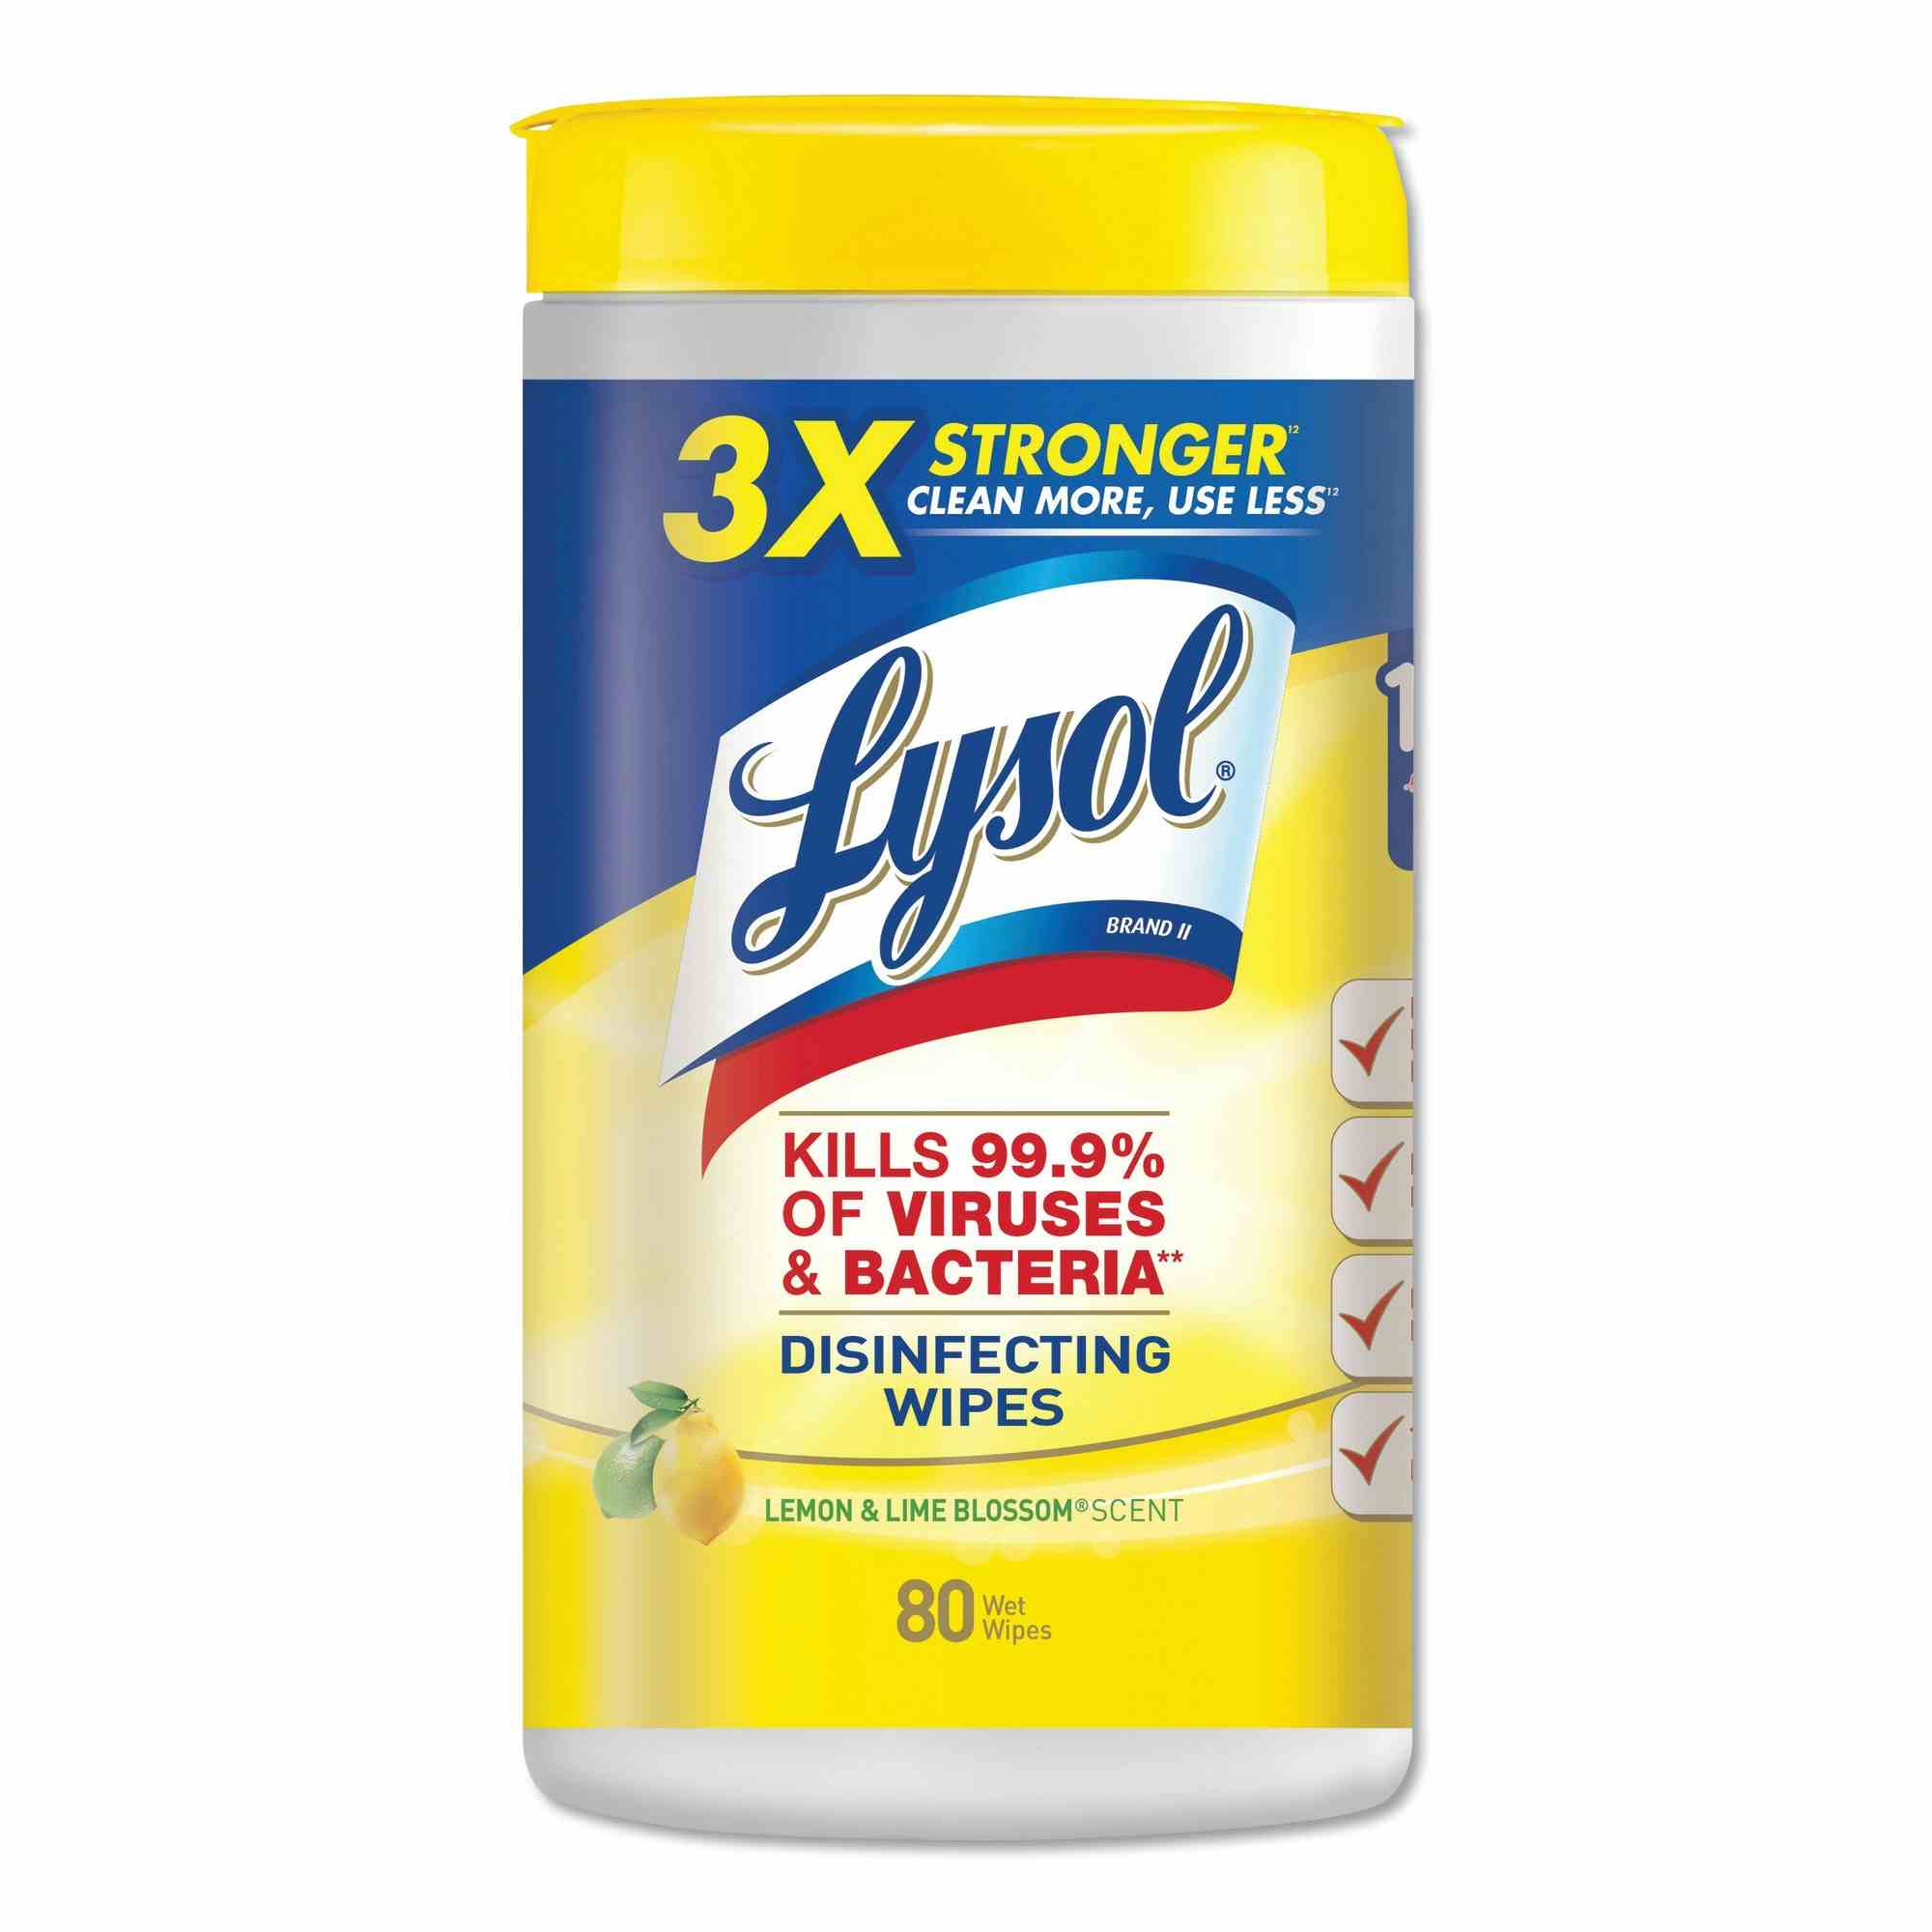 Lysol Surface Disinfectant Cleaner Premoistened Alcohol Based Wipe, Lemon Lime Blossom Scent, Canister, RAC77182CT, Case of 6 Canisters